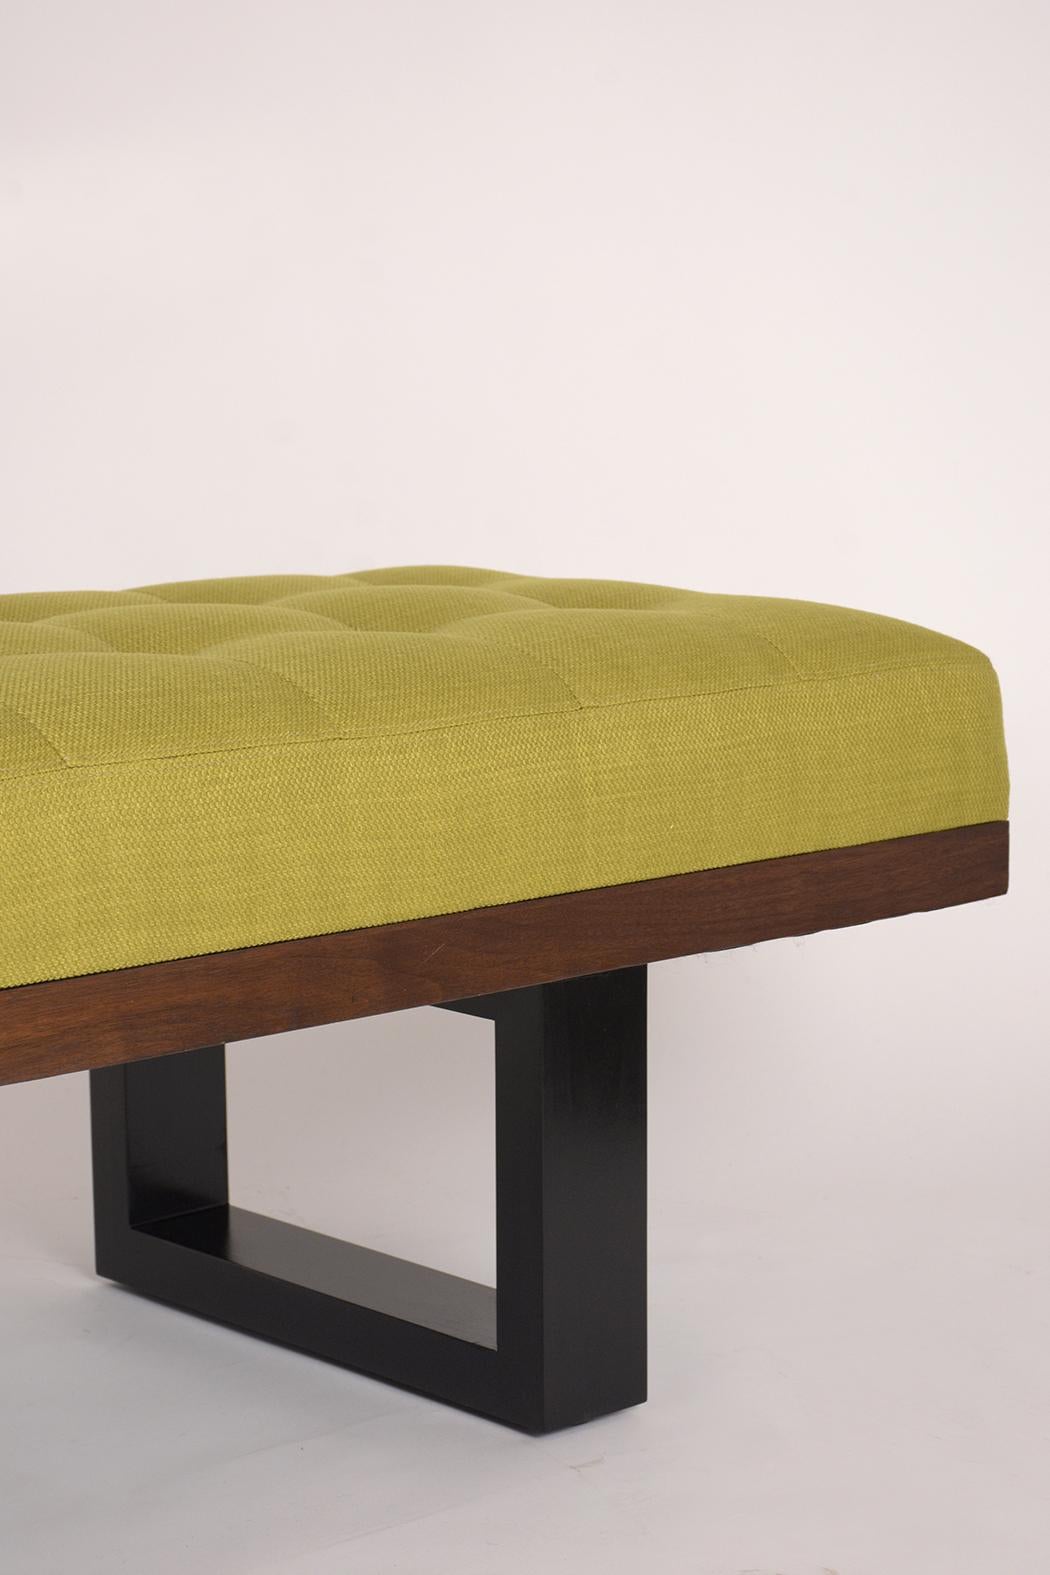 American Mid-Century Modern Tufted Bench